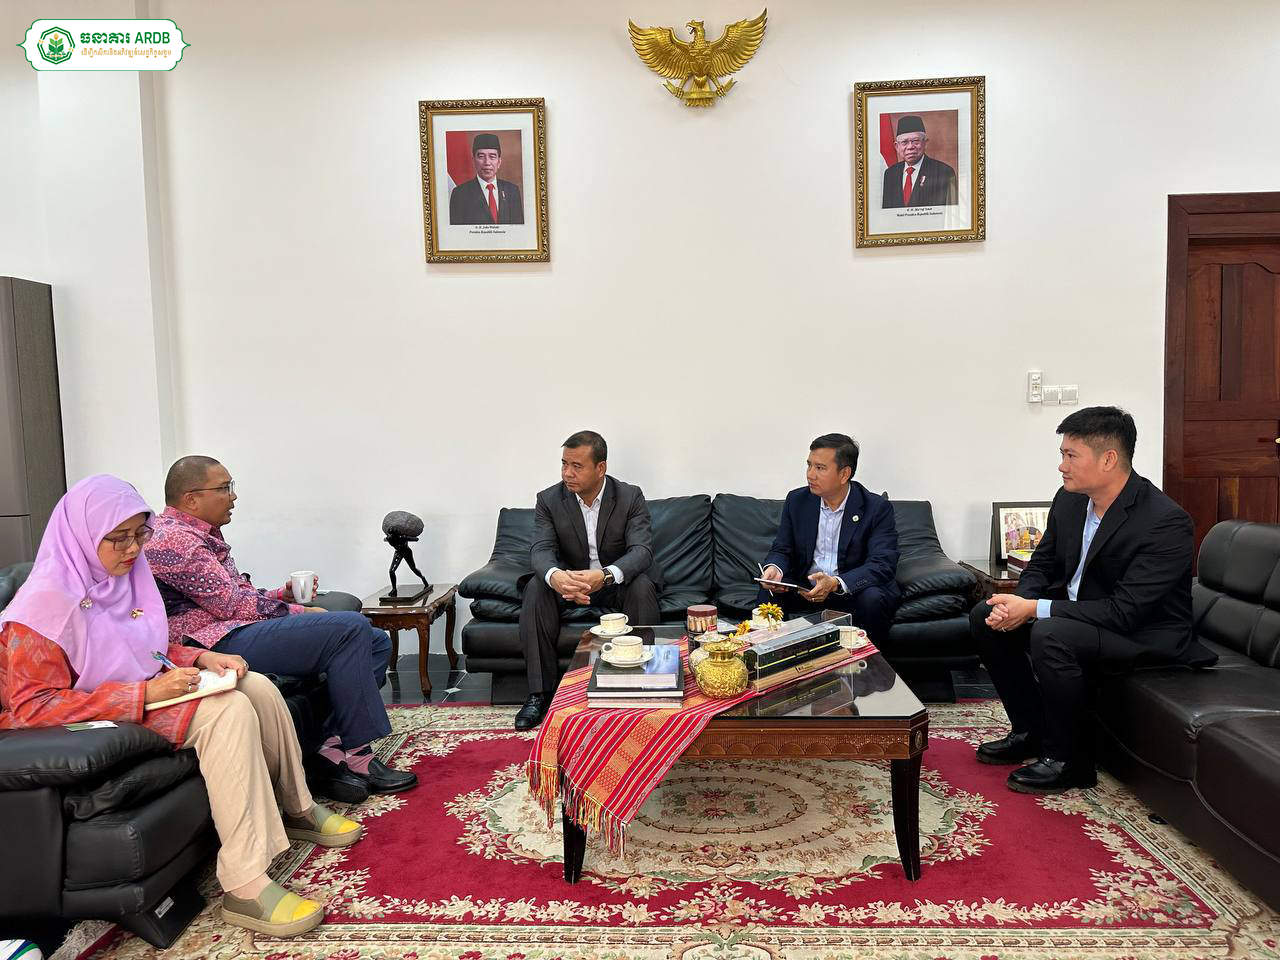 H.E. Dr. KAO Thach, to lead his colleague and the Representative from City Rice Import Export Co., Ltd to pay a courtesy call and discussion with H.E Ambassador at the Embassy of the Republic of Indonesia